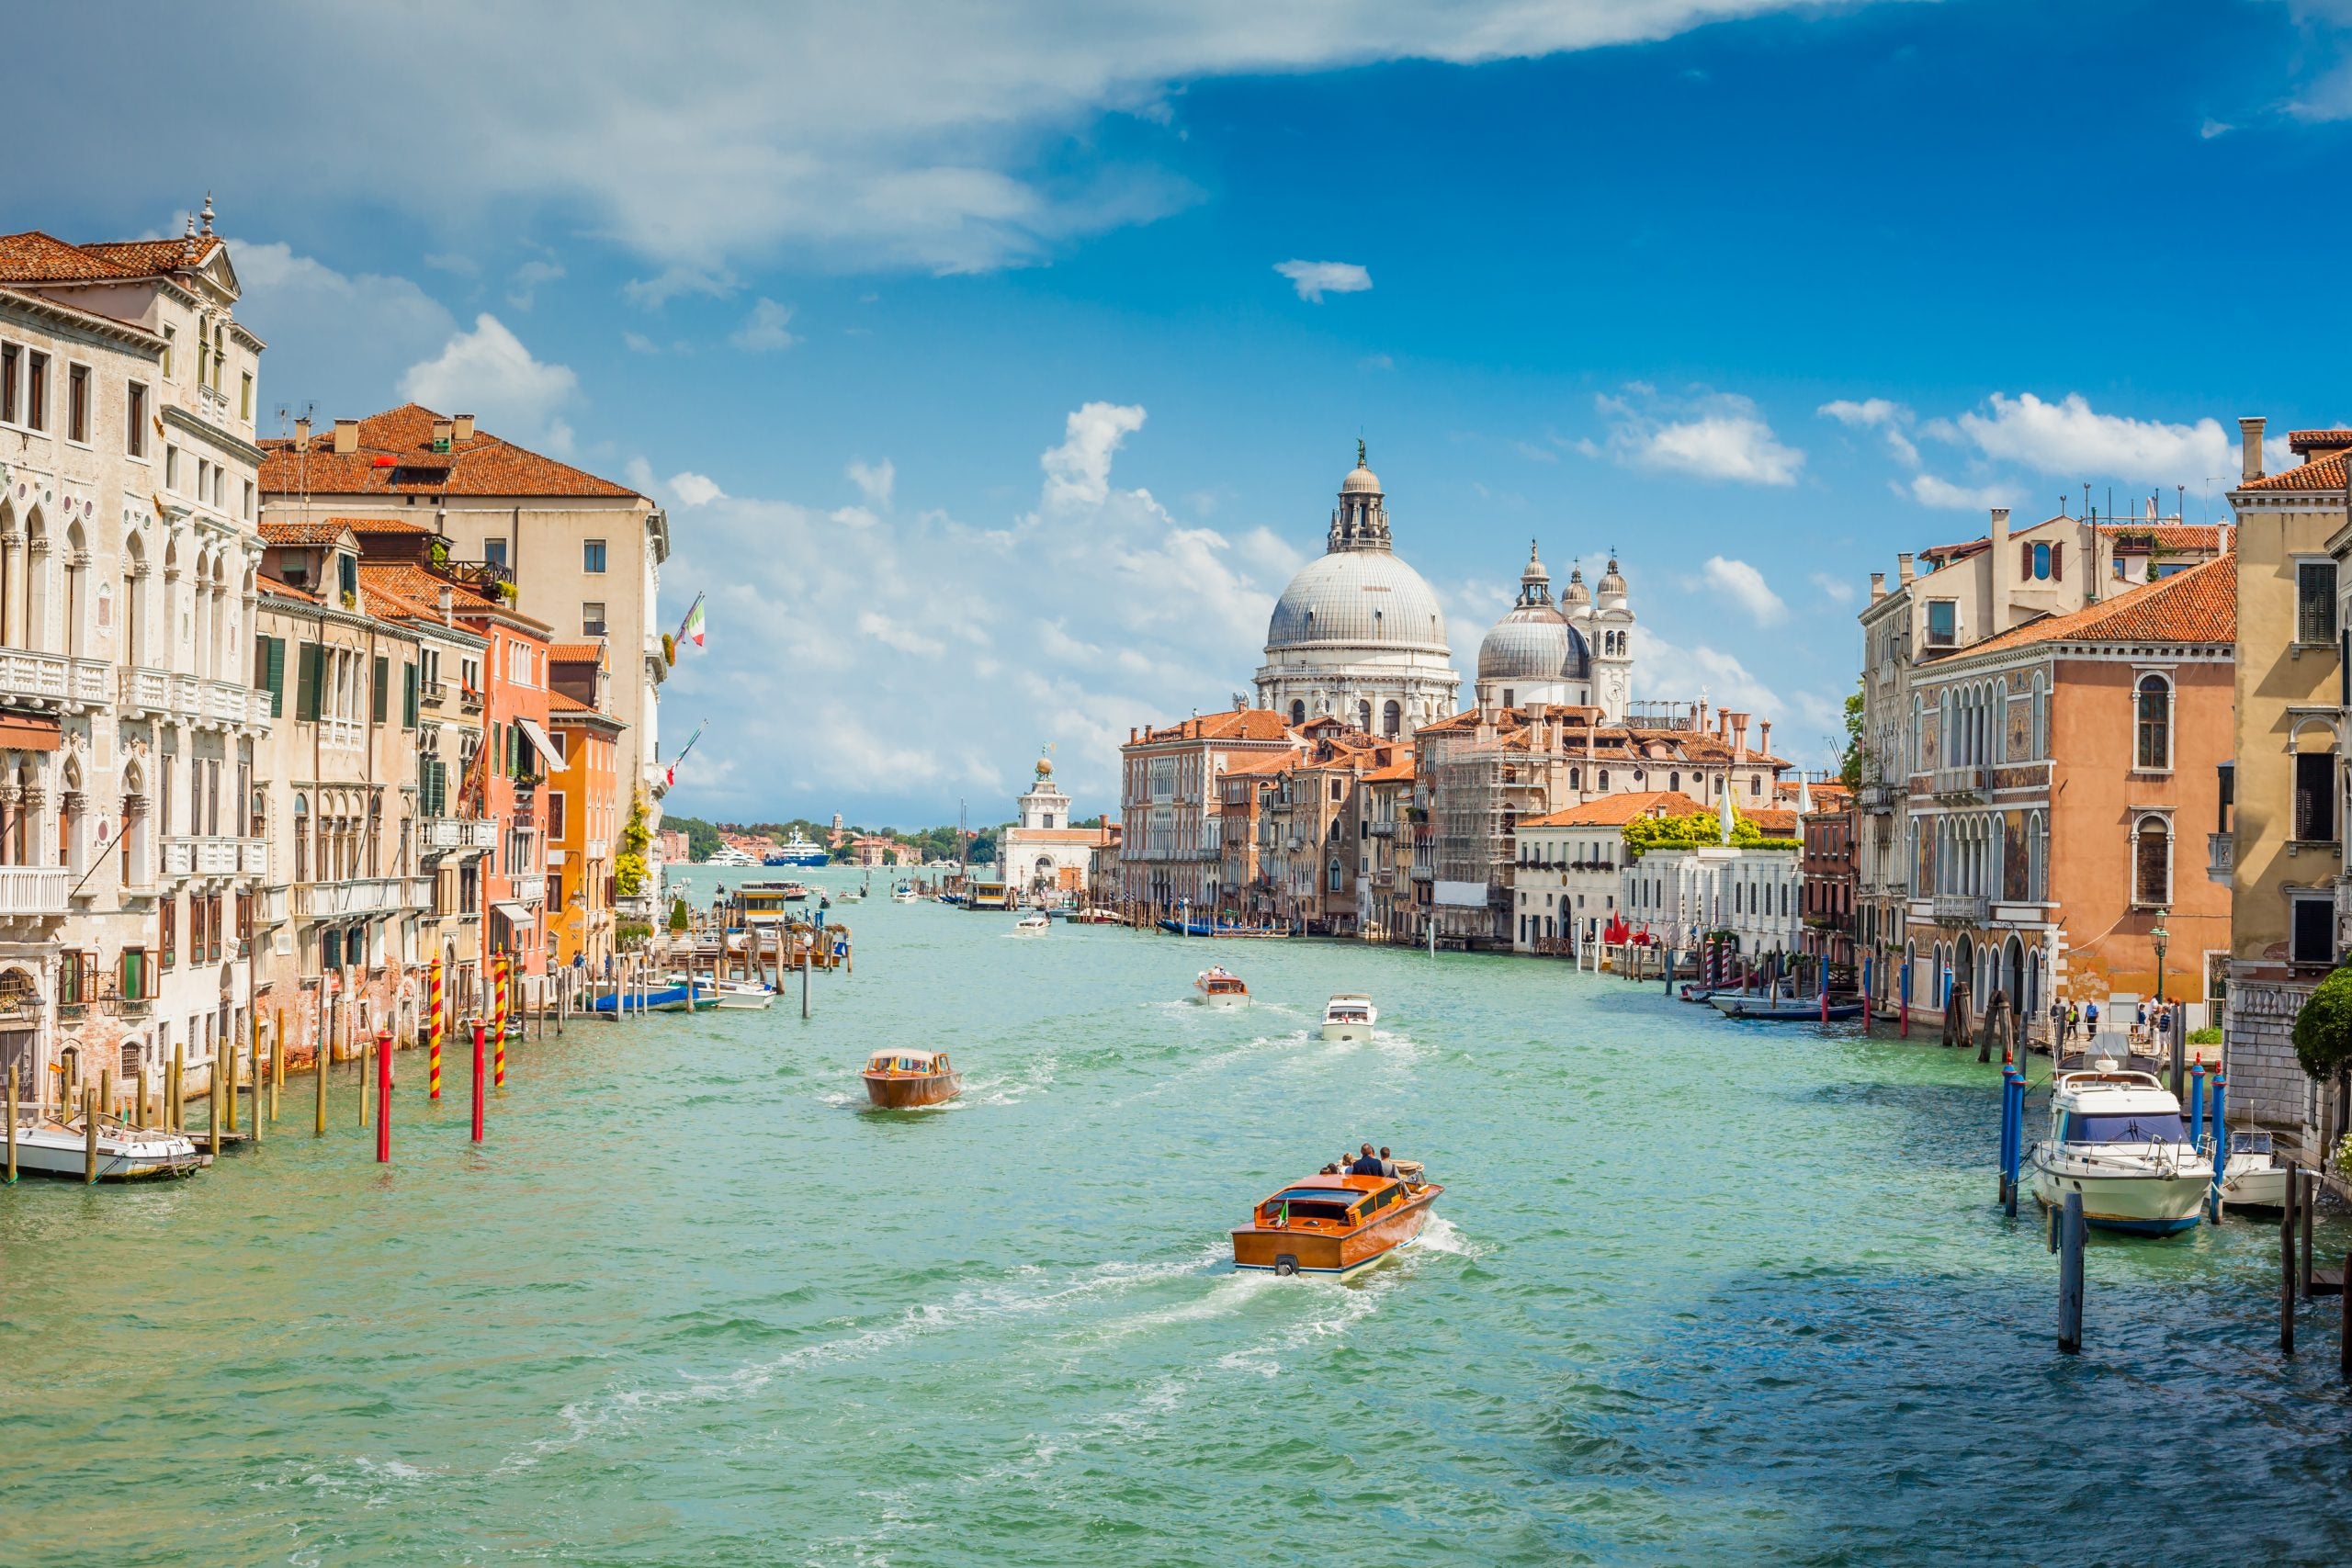 Grand Canal on a sunny summer day, Venice, Italy